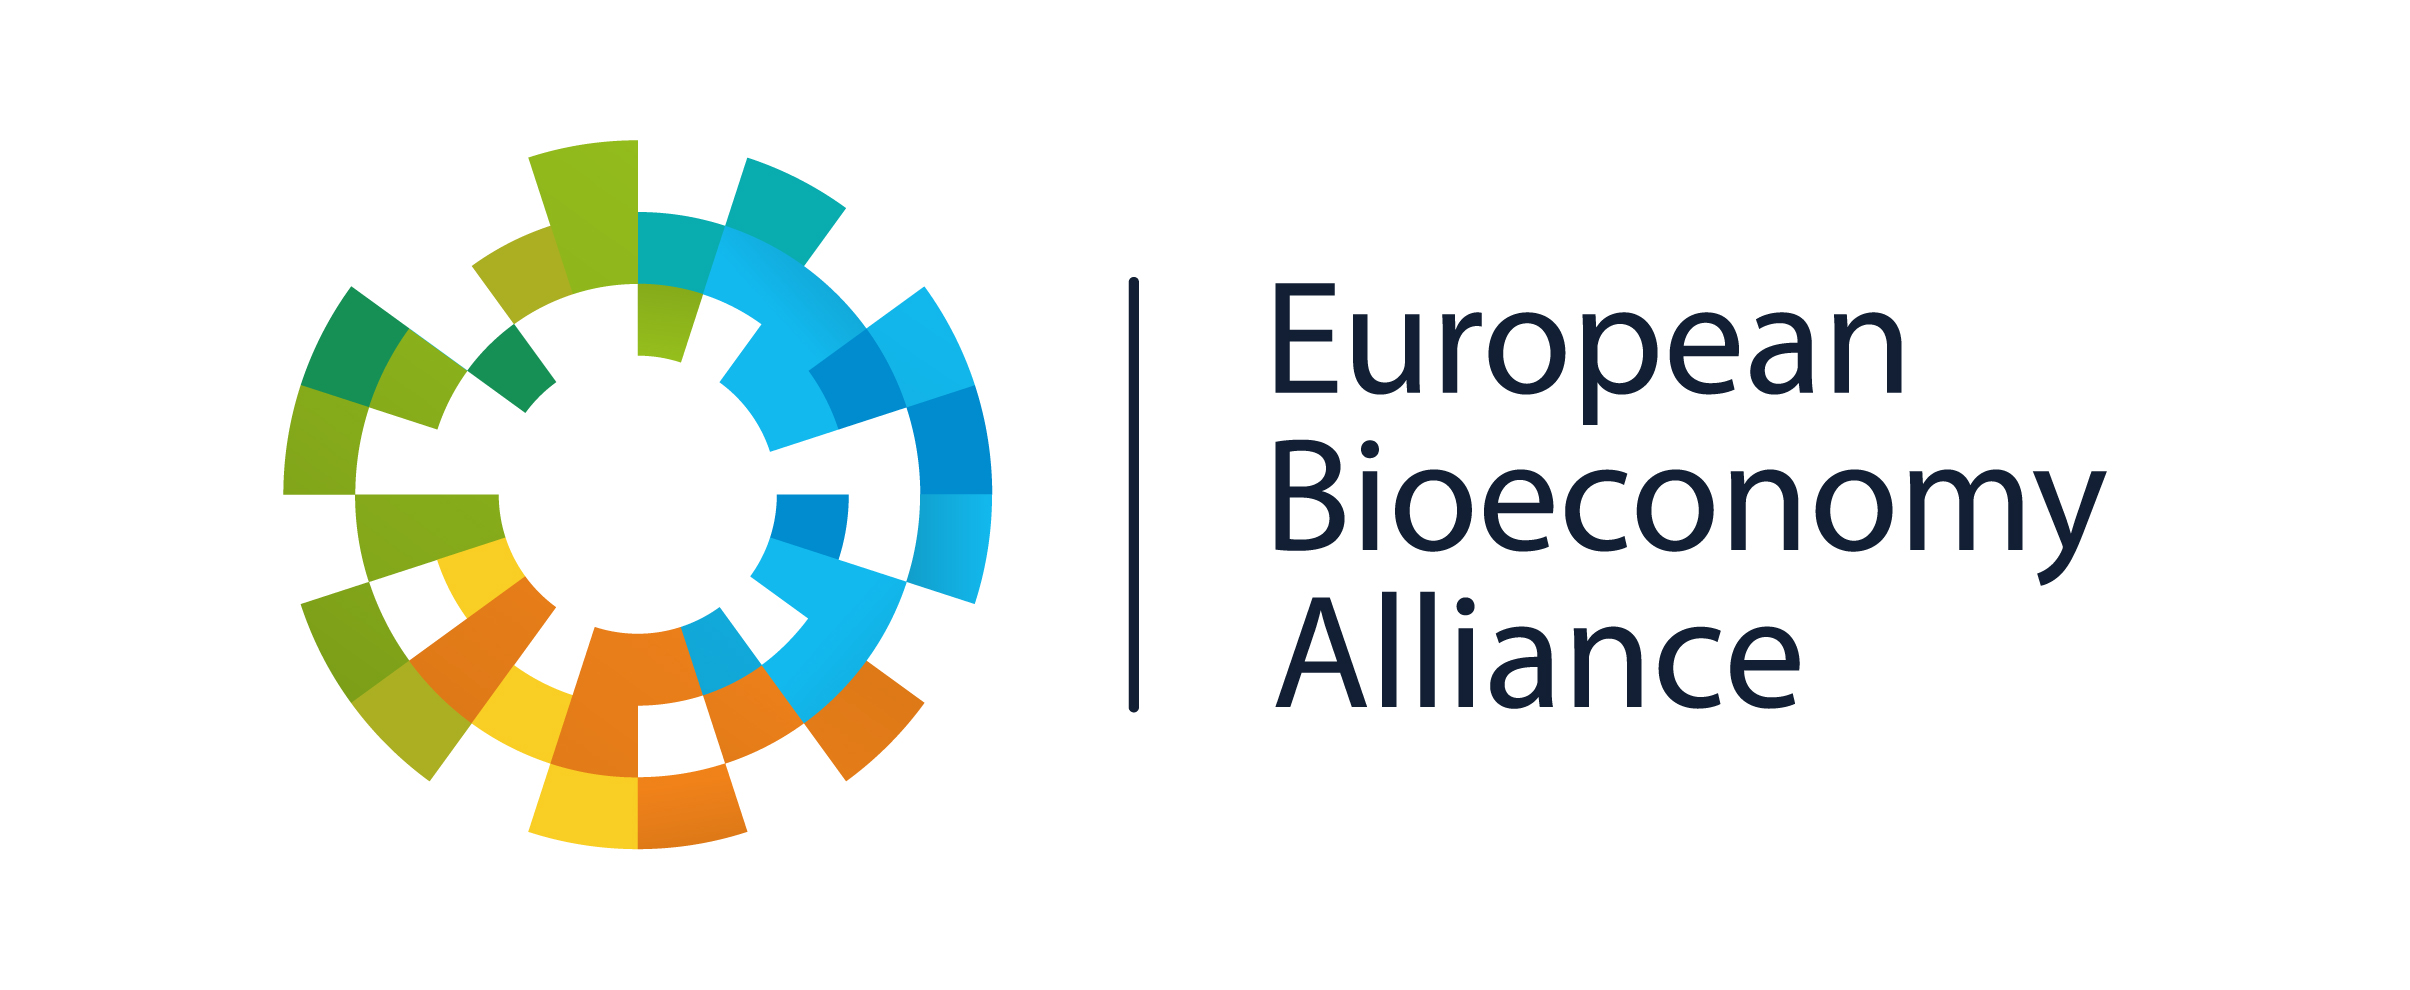 Bioeconomy 2.0 will help lead the EU’s renewable revolution – with the right support